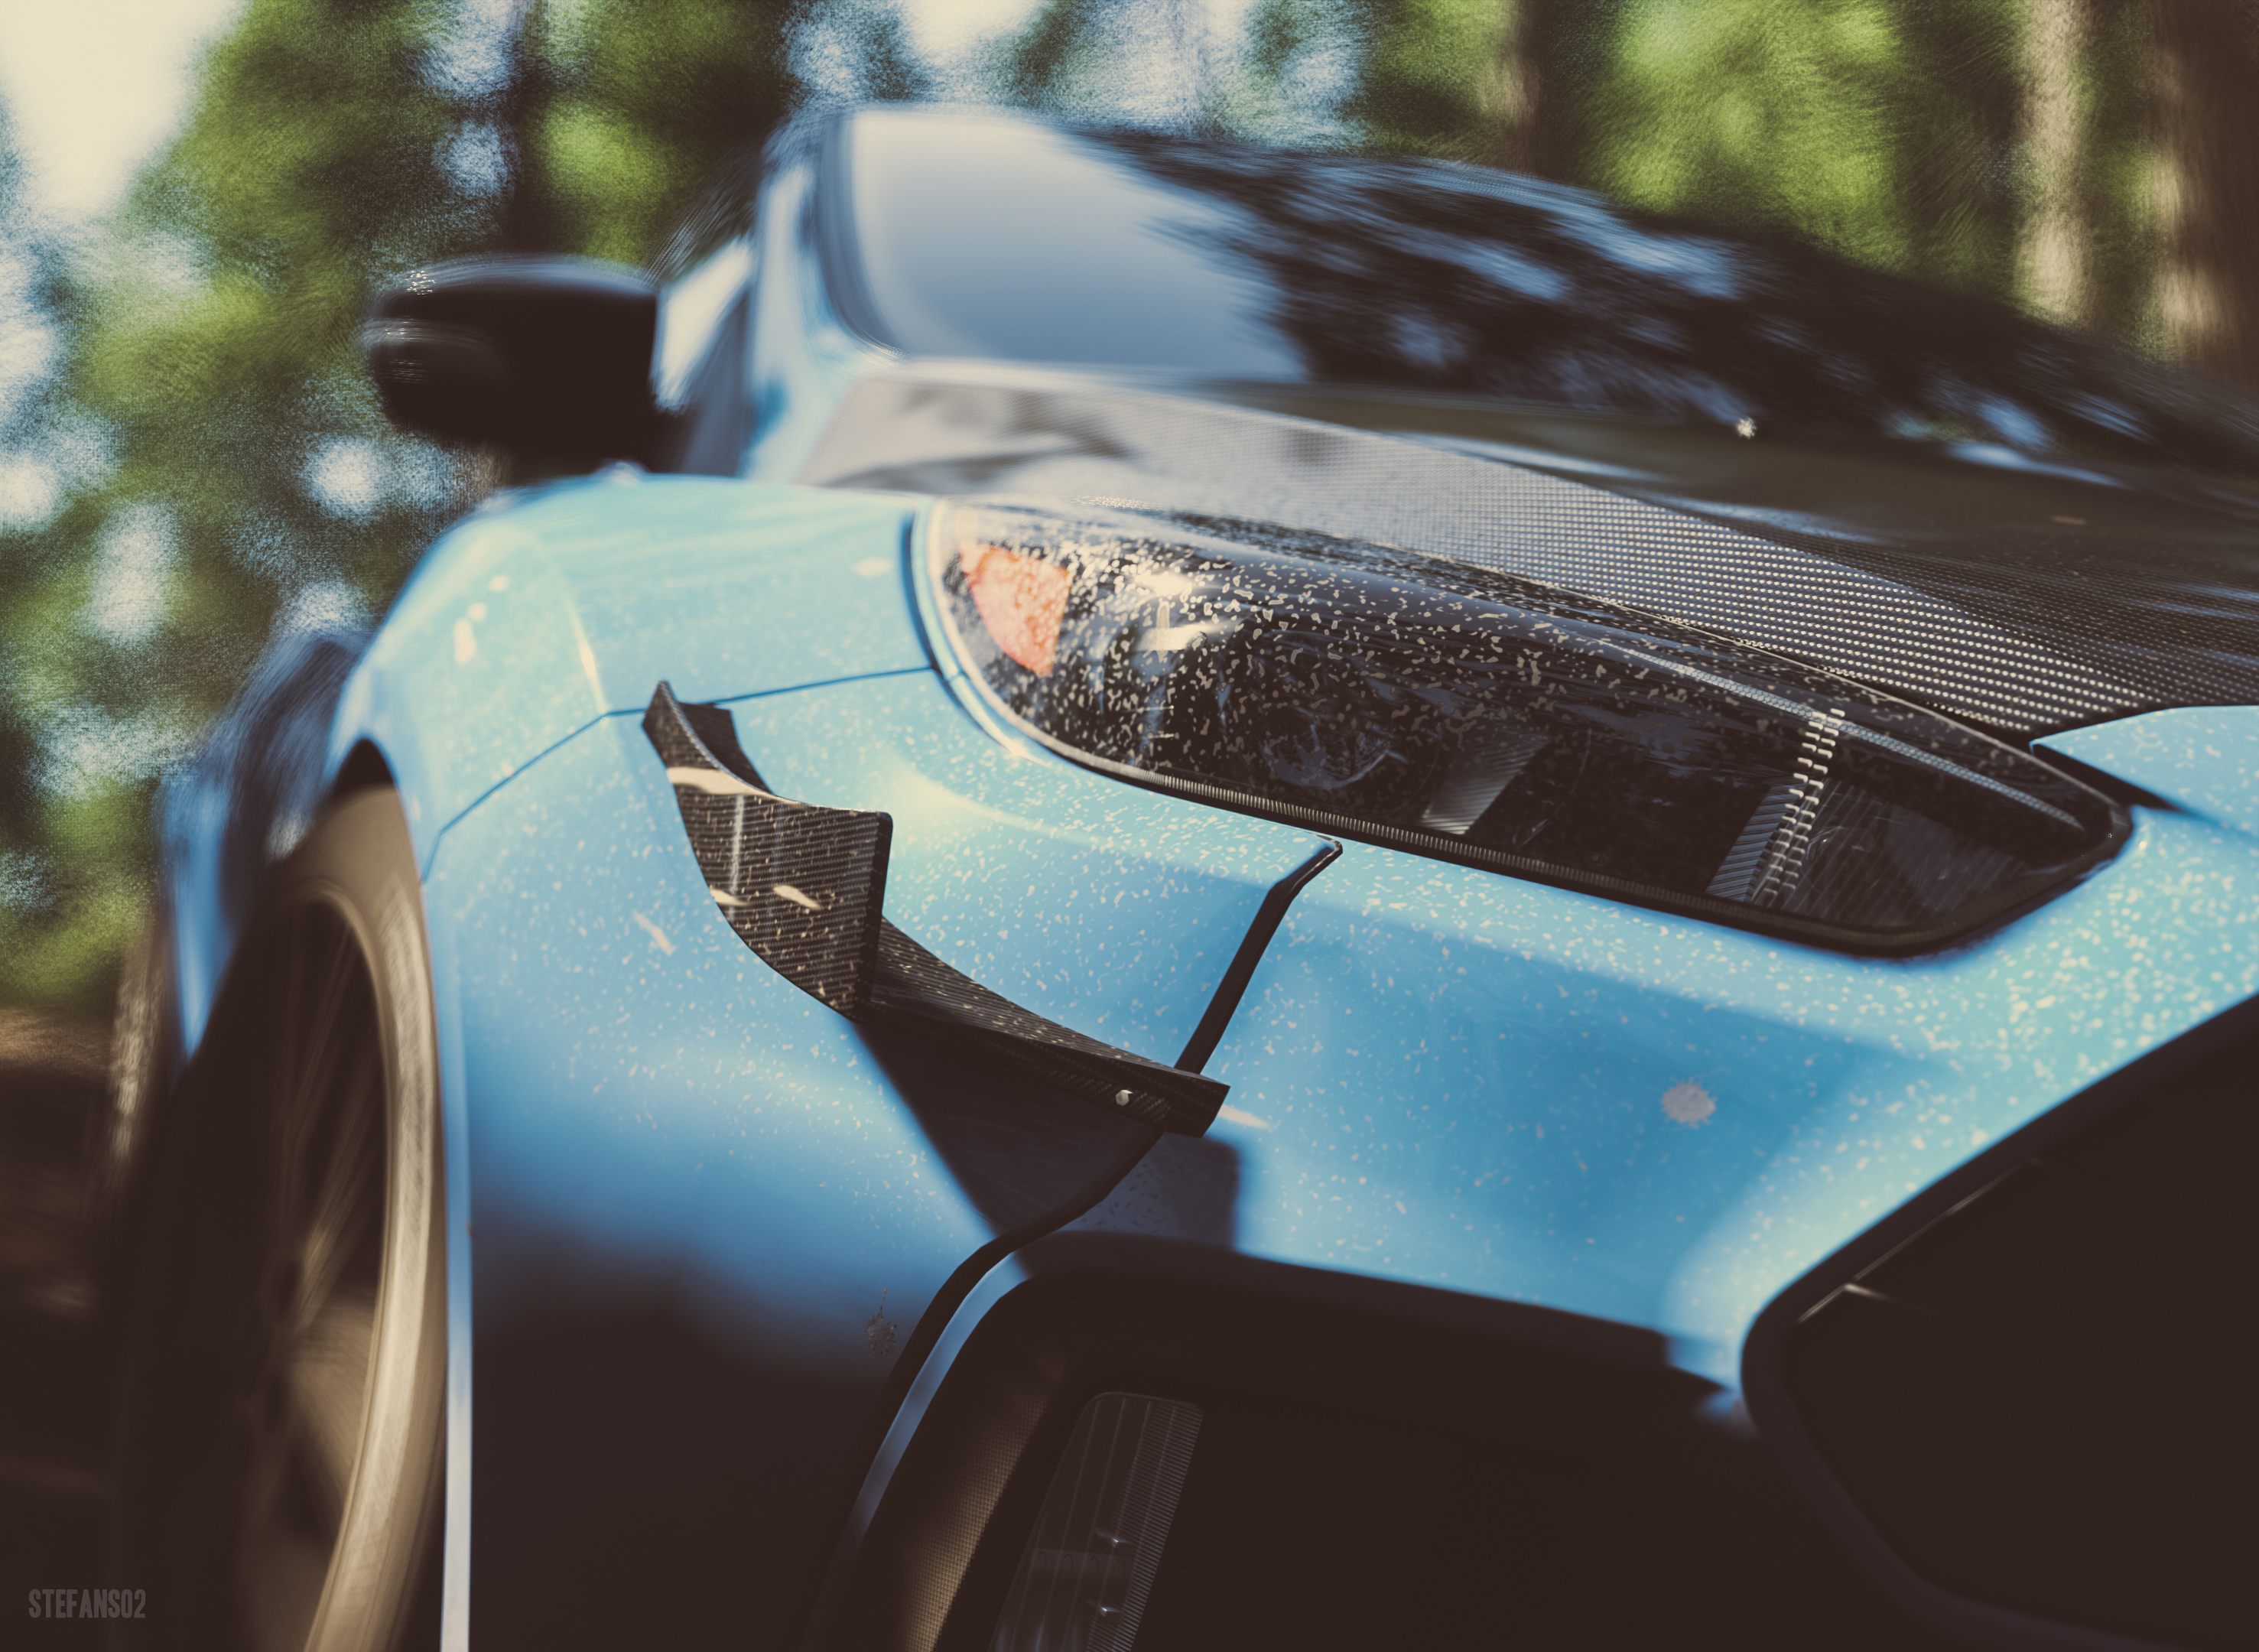 New Lock Screen Wallpapers cars, blue, car, close up, front view, machine, headlight